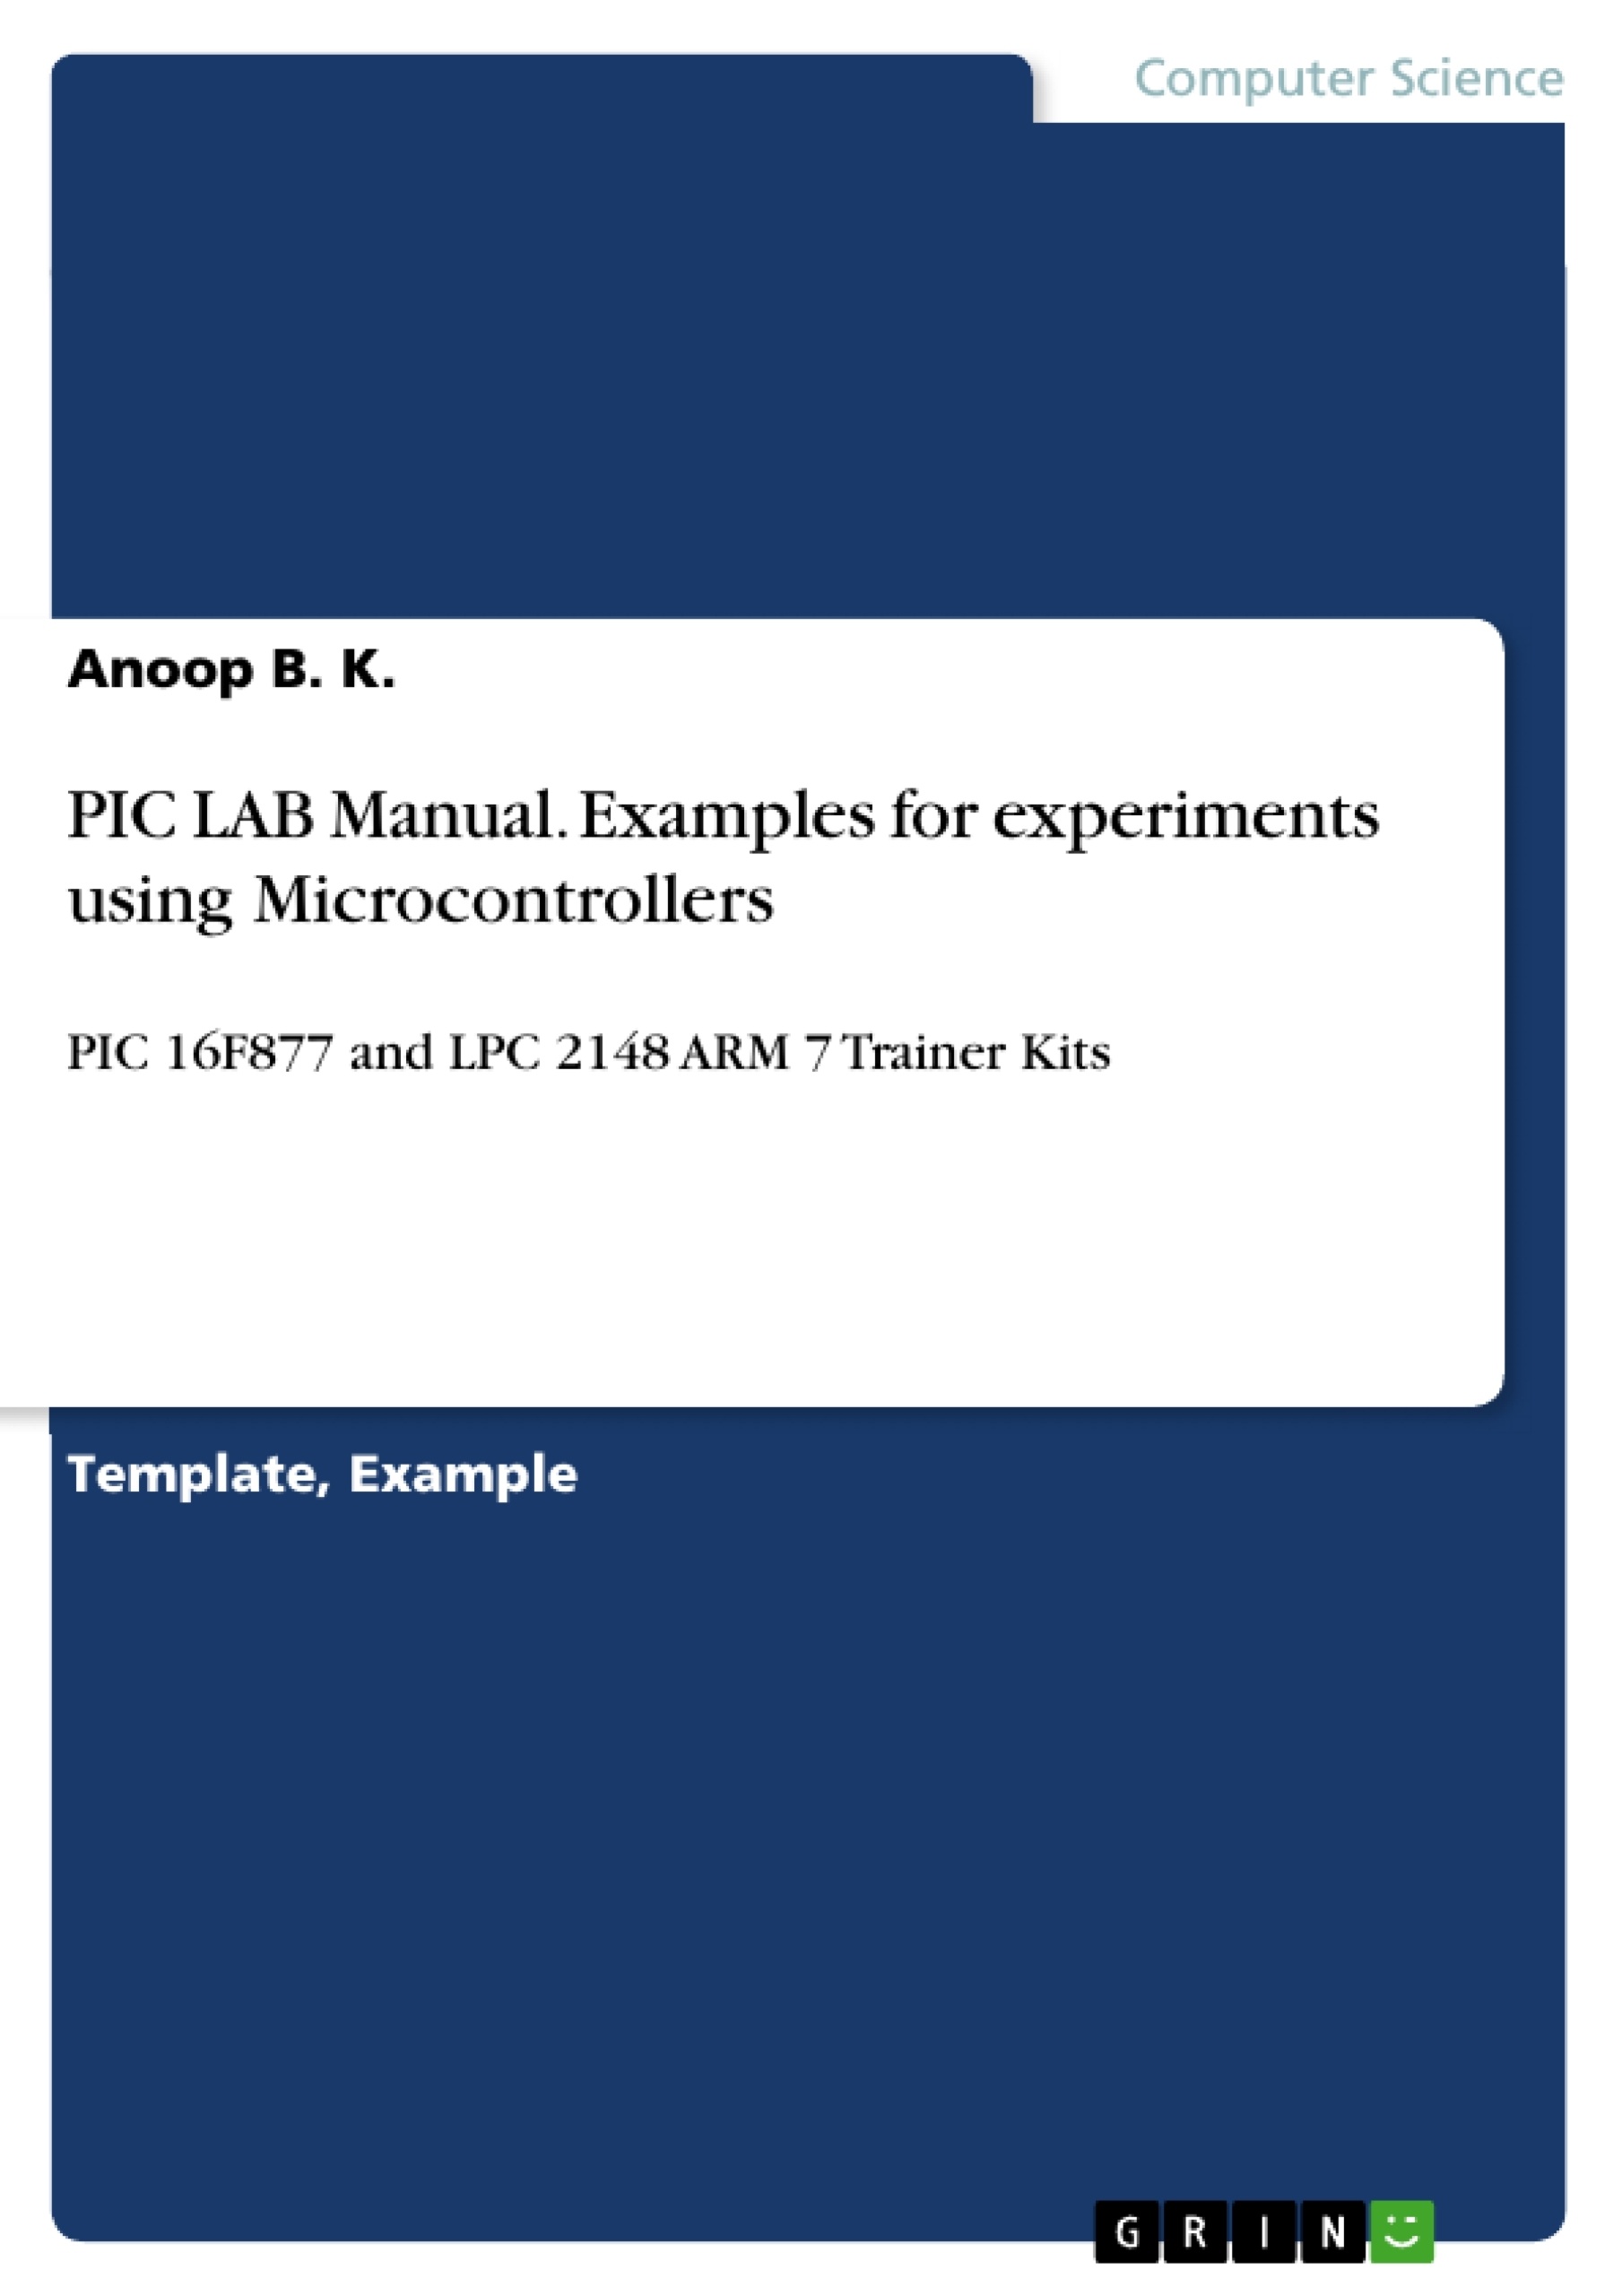 Title: PIC LAB Manual. Examples for experiments using Microcontrollers